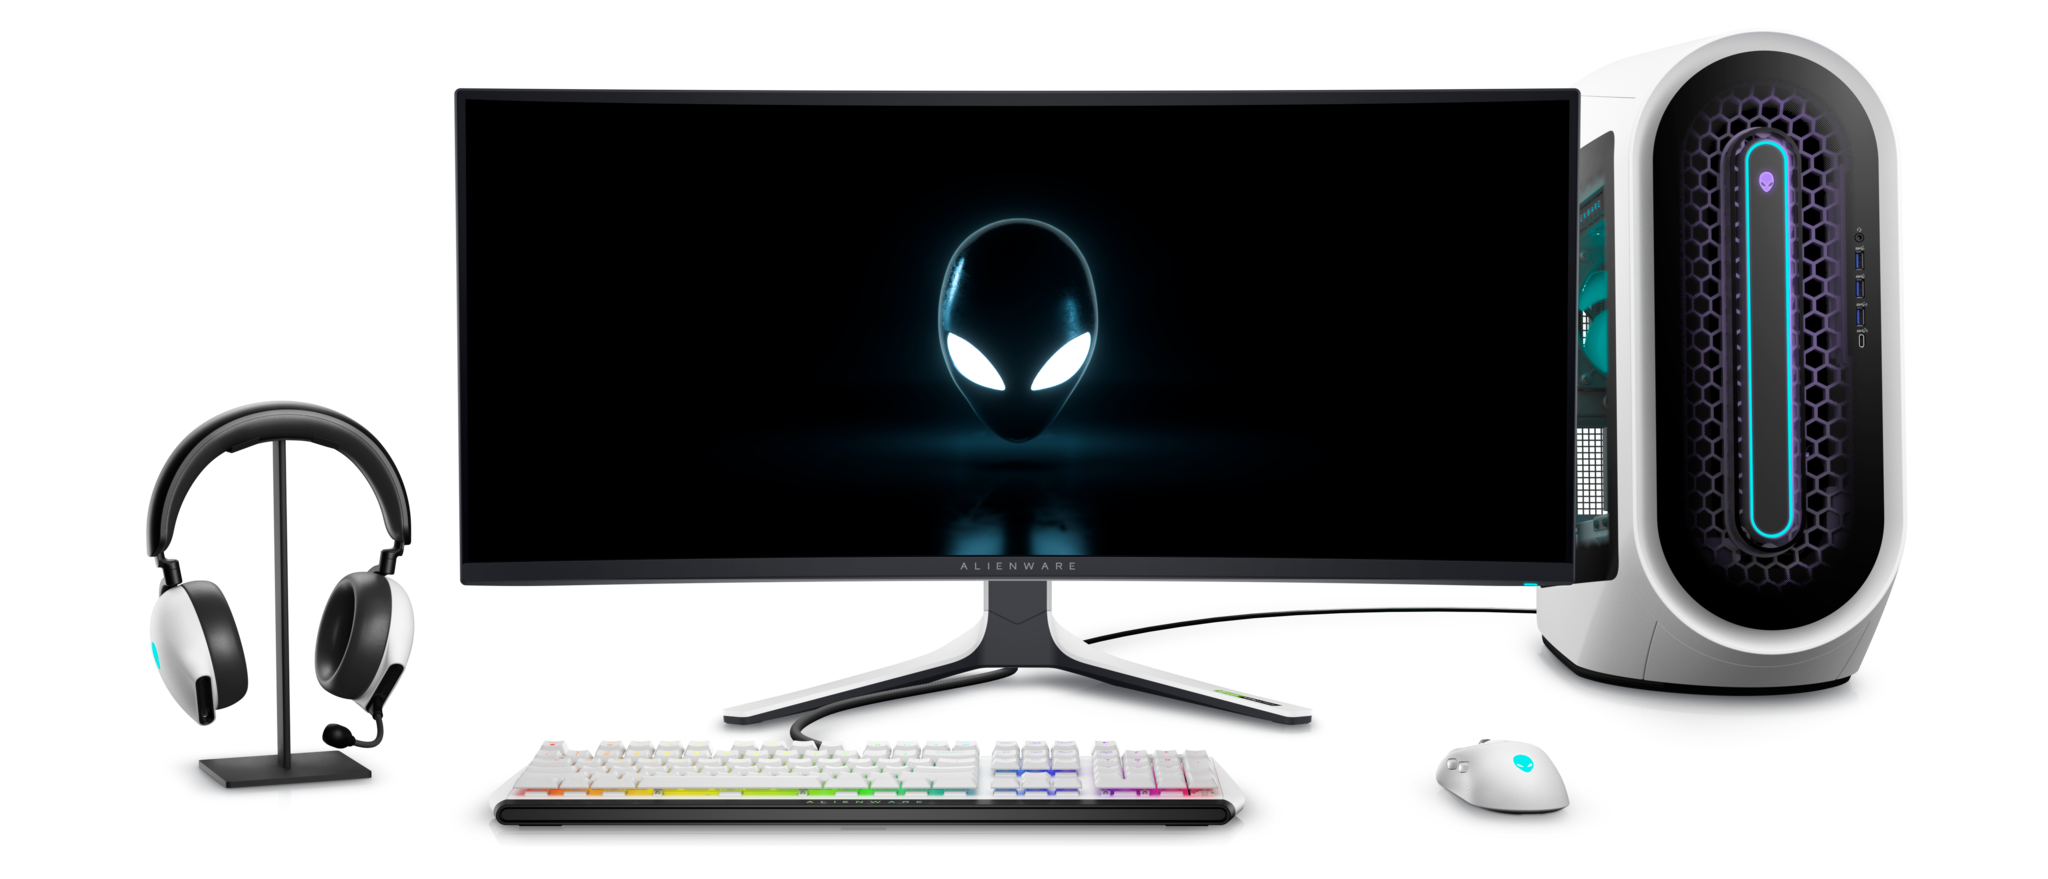 alienware-oled-monitor-ces-22.png